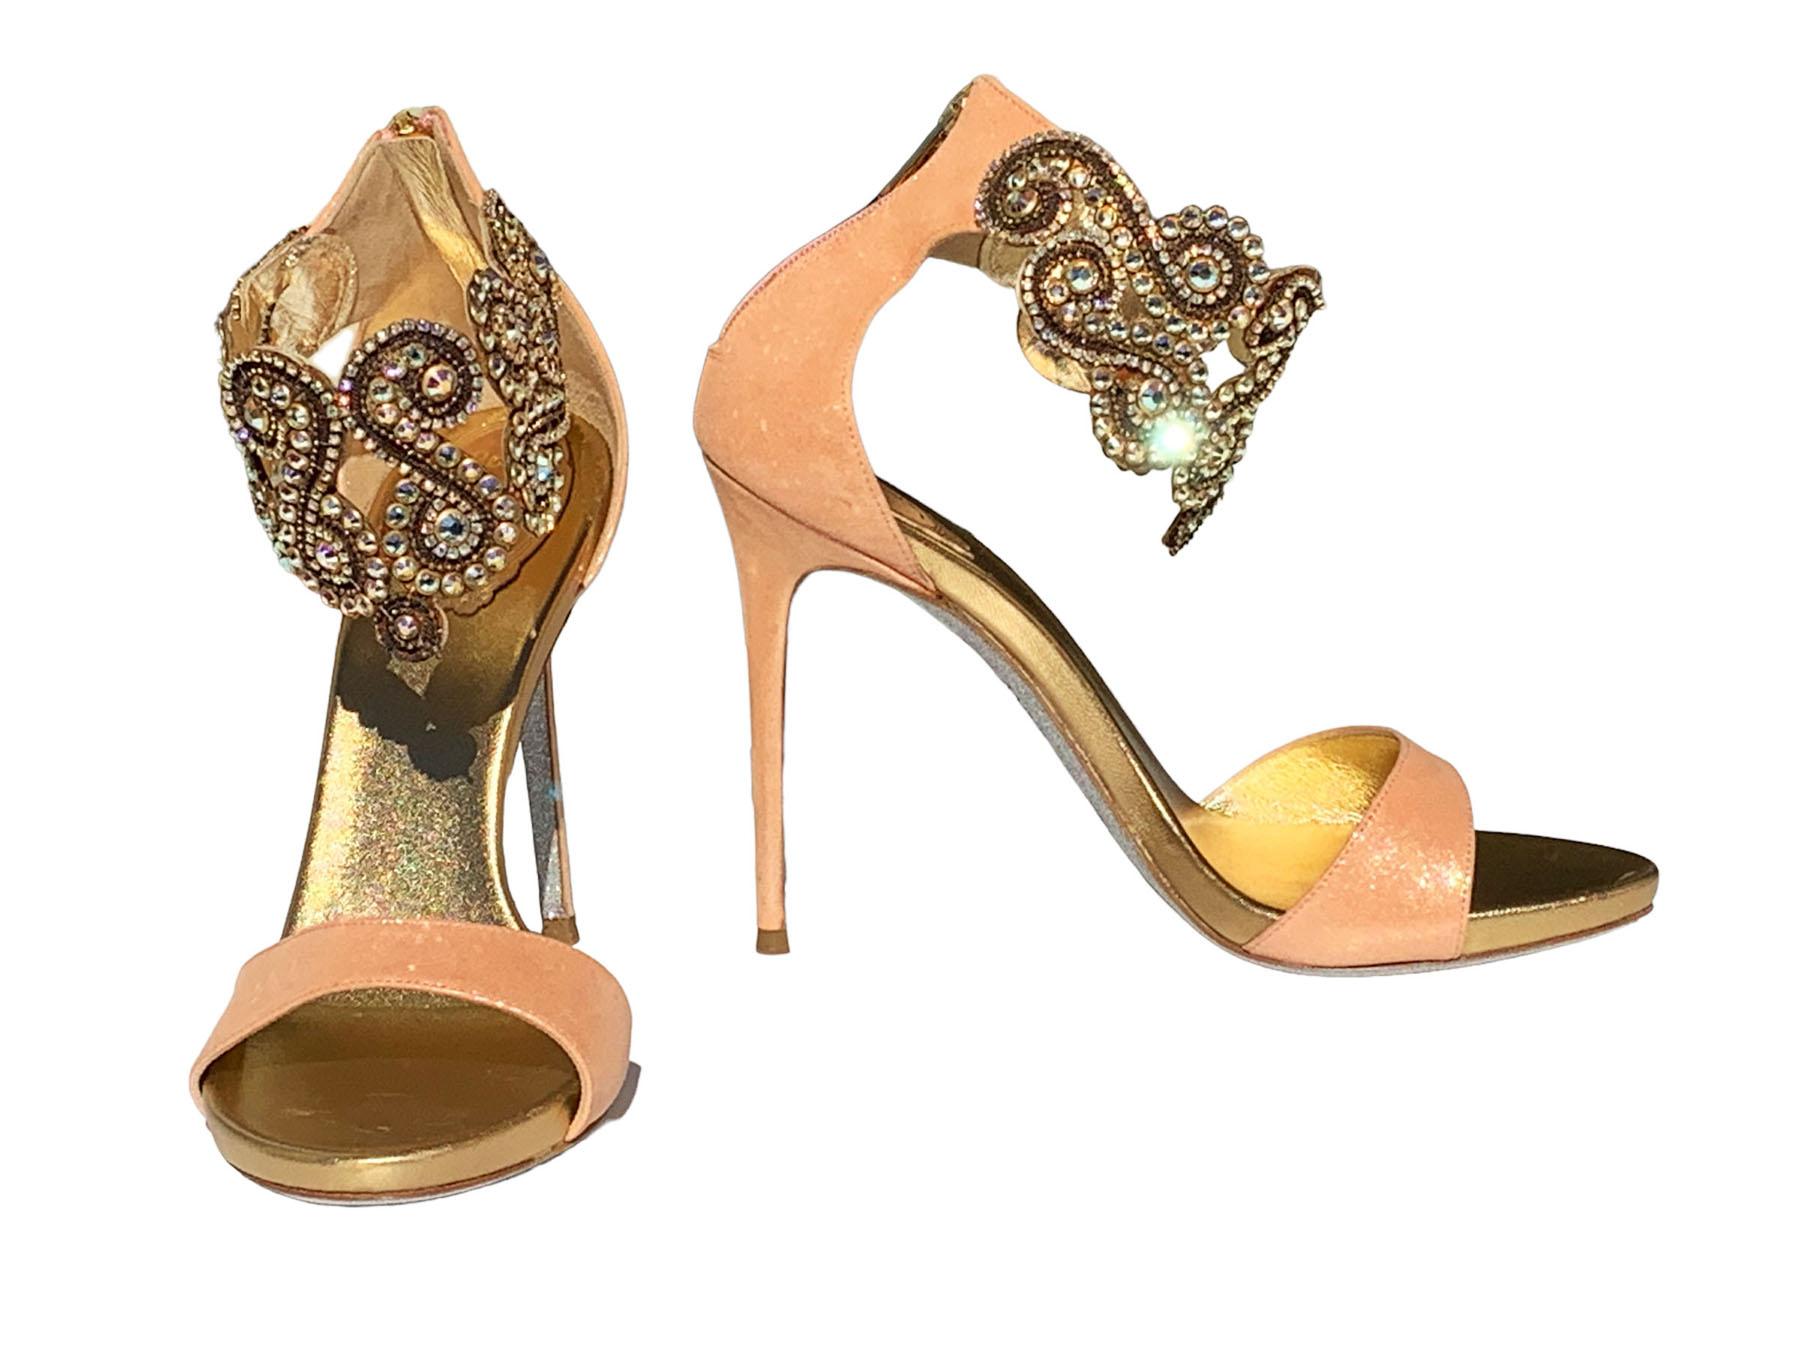 Rene Caovilla Embellished Metallic Leather Sandals 
Italian size - 37.5  Fits true to size. 
Peach and gold colors, Metallic leather, Crystal and chain-embellished ankle strap, Round toe, Glitter-finished sole, Zip fastening along back. 
Heel